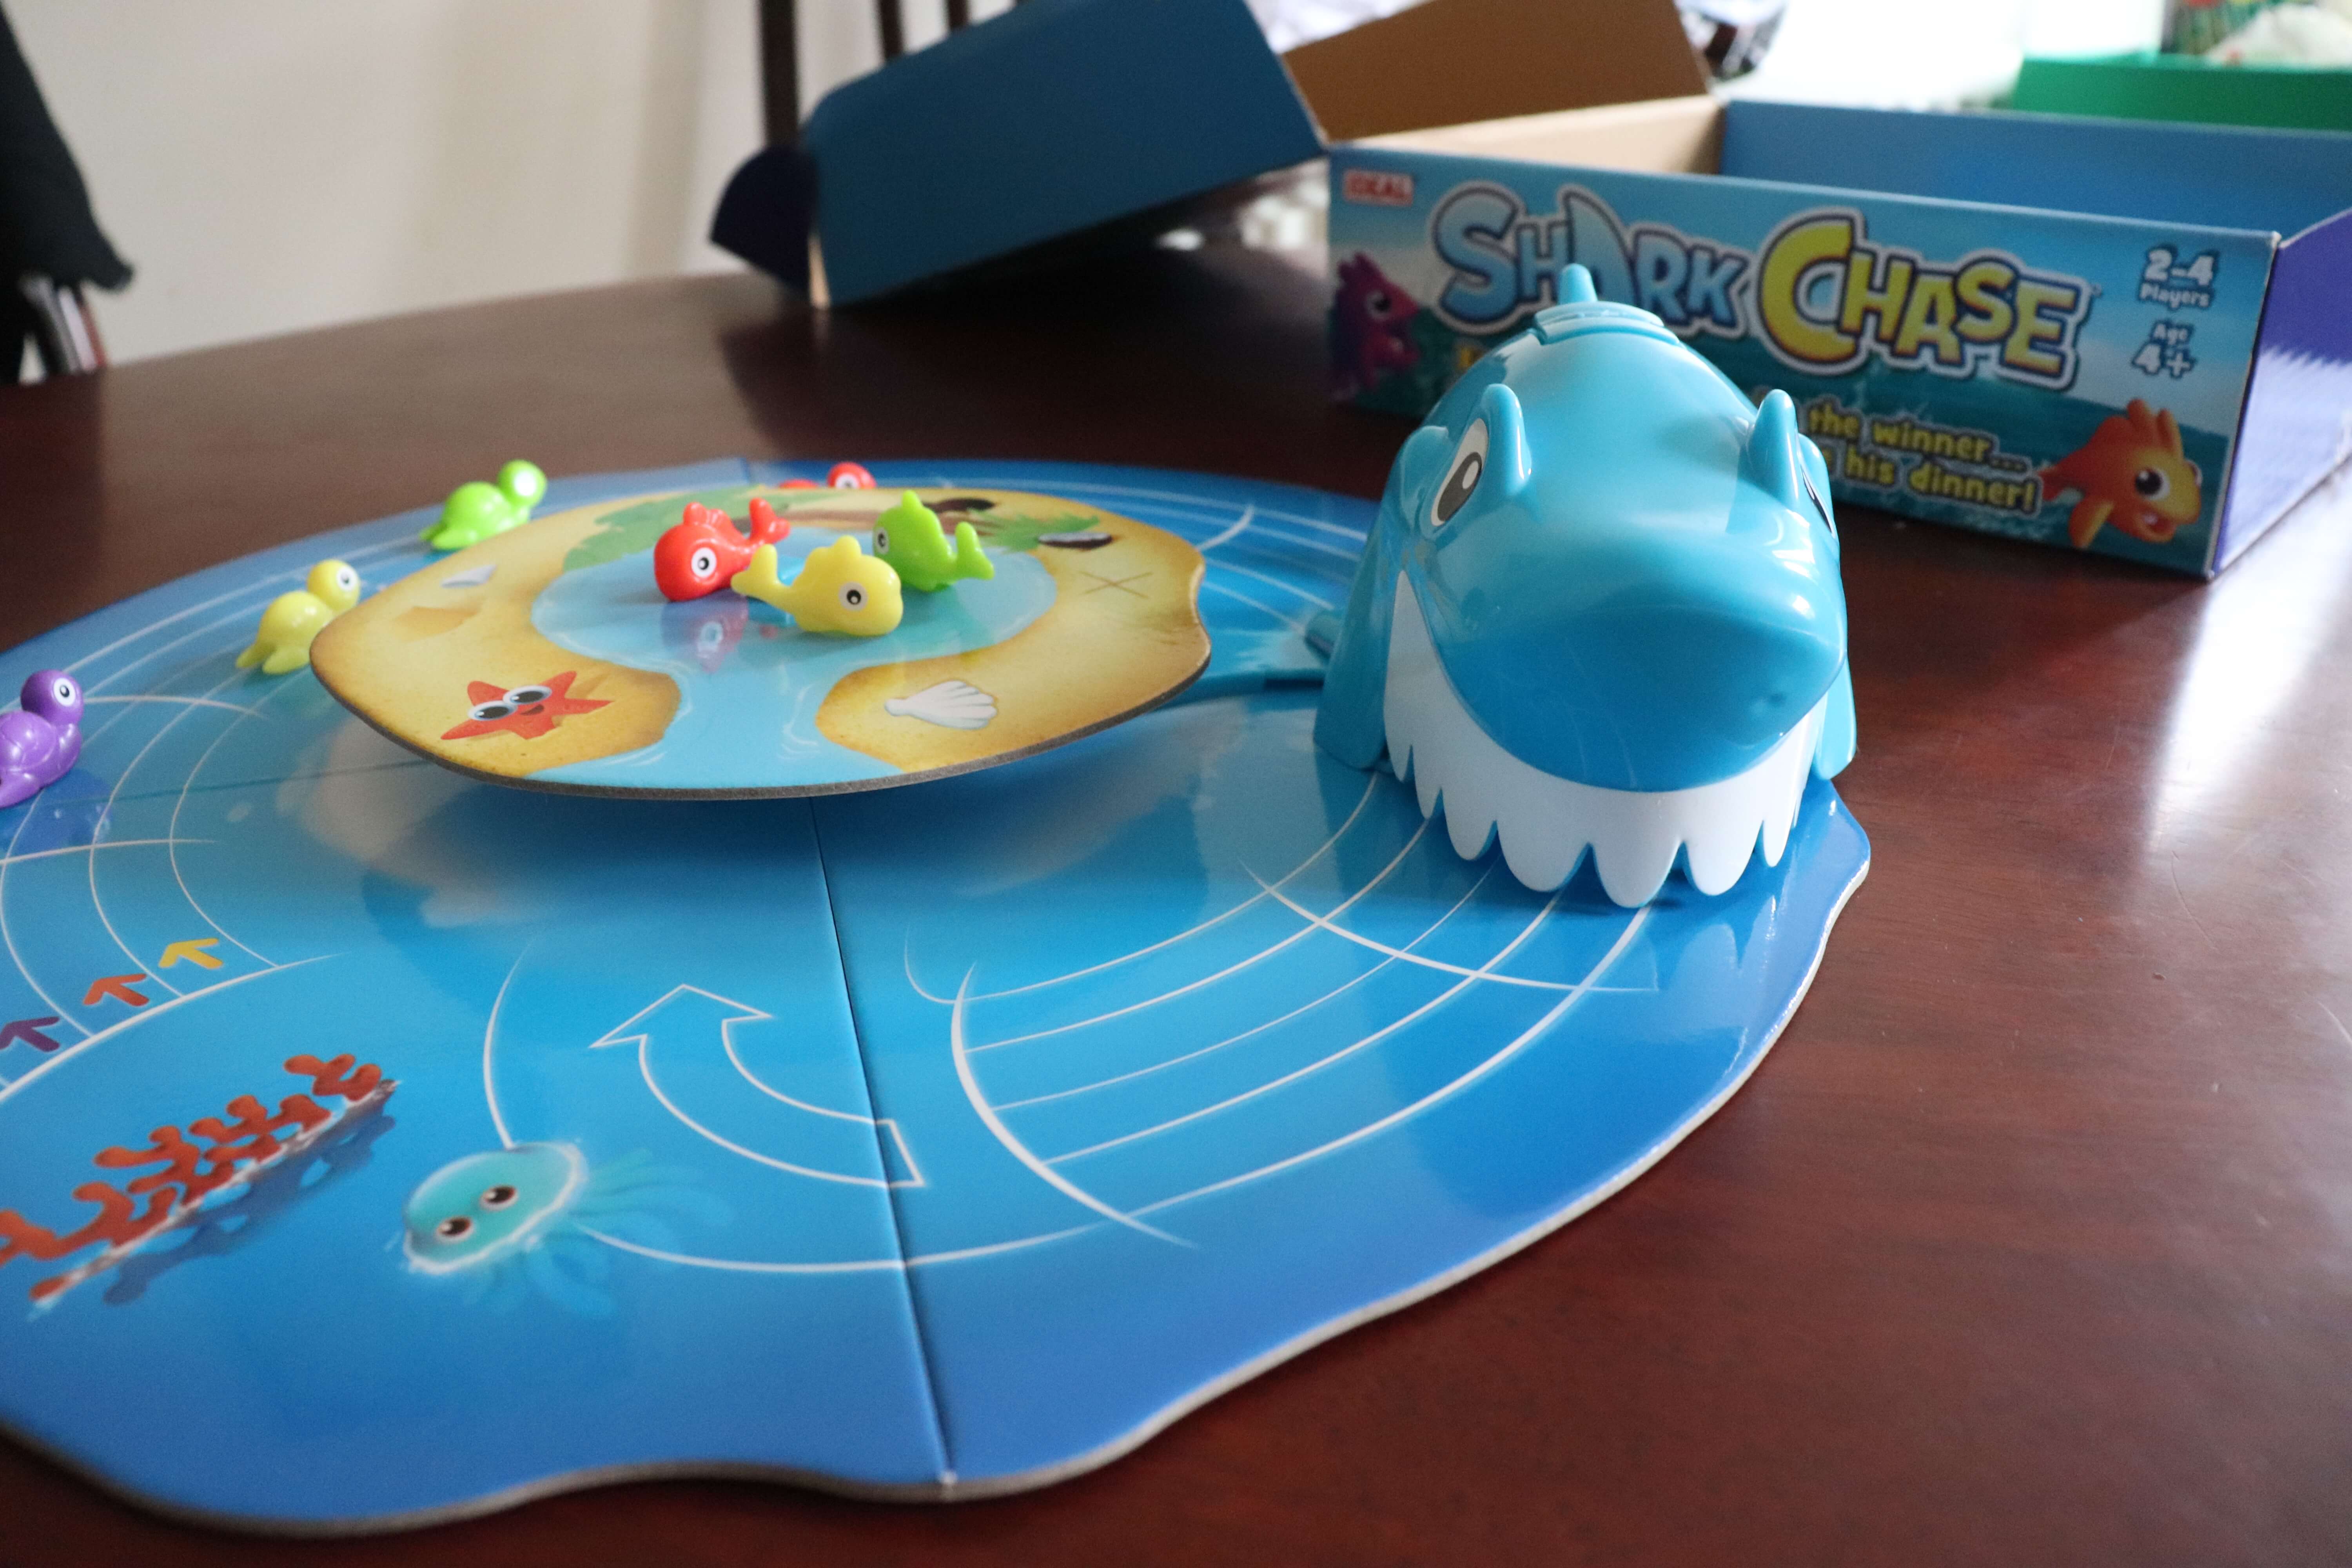 Shark Chase - a board game with fish